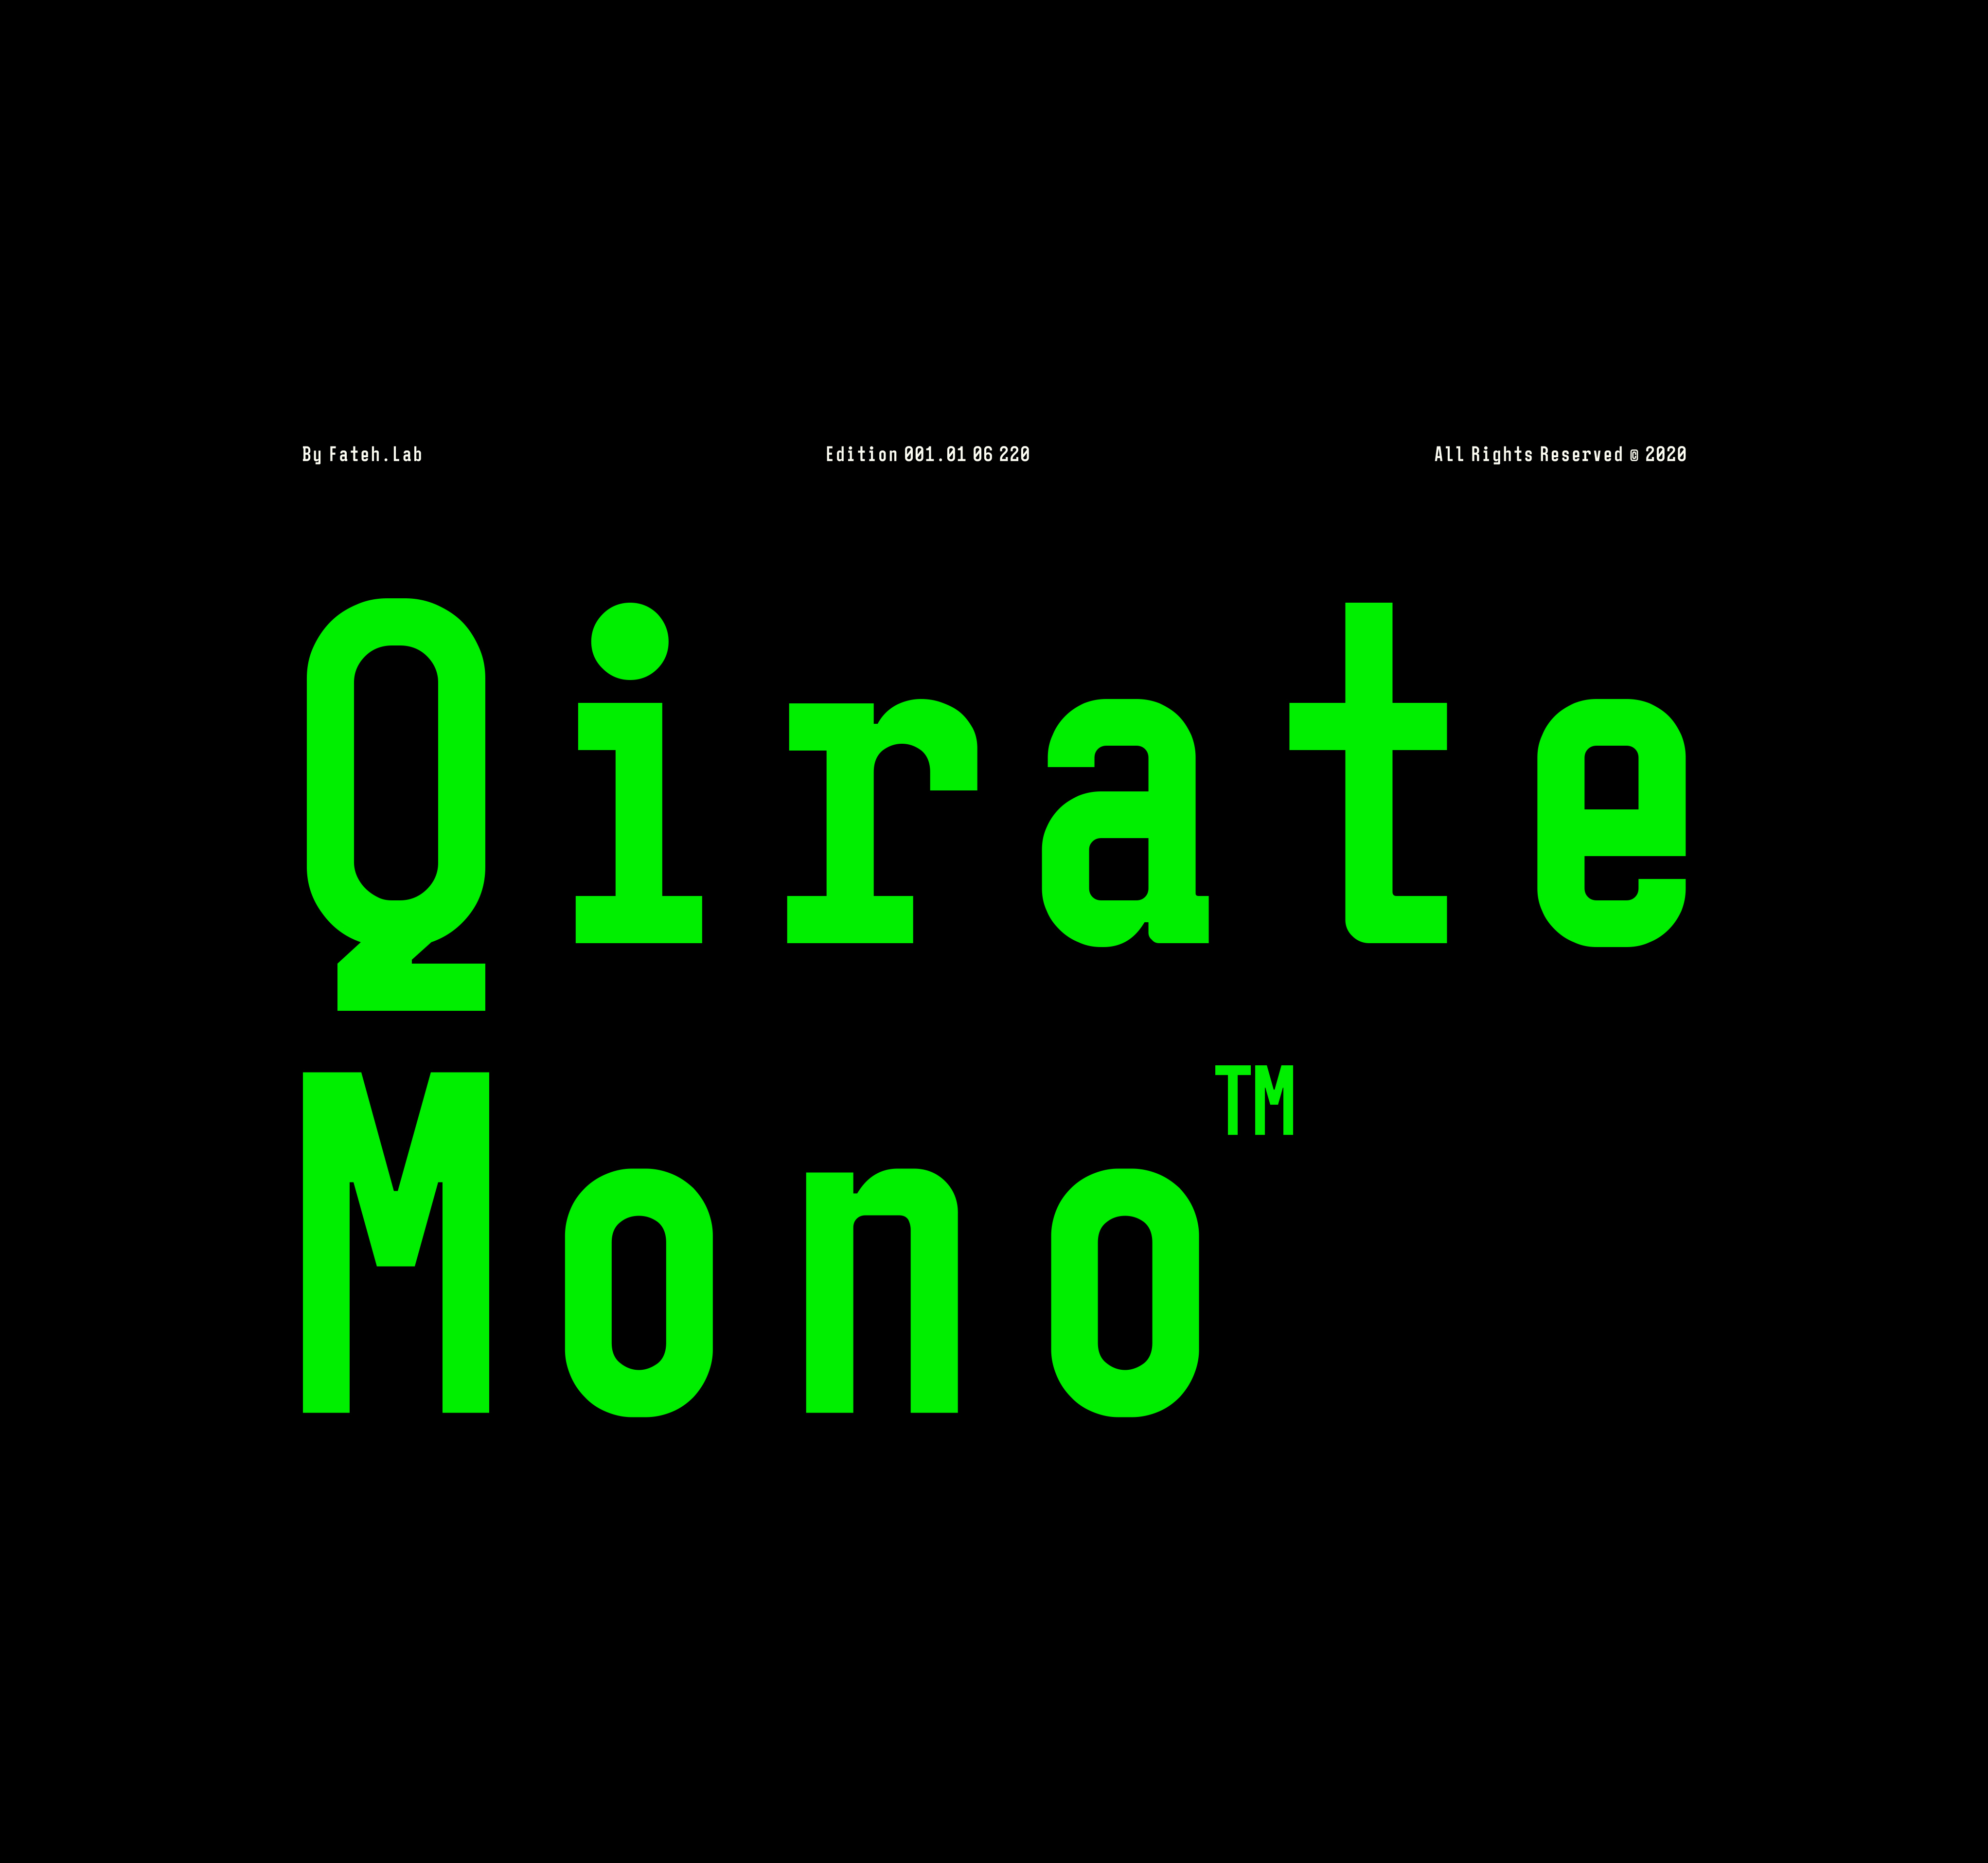 Font Feature of the Month: Qirate Mono From Wisnu Cipto Wibowo